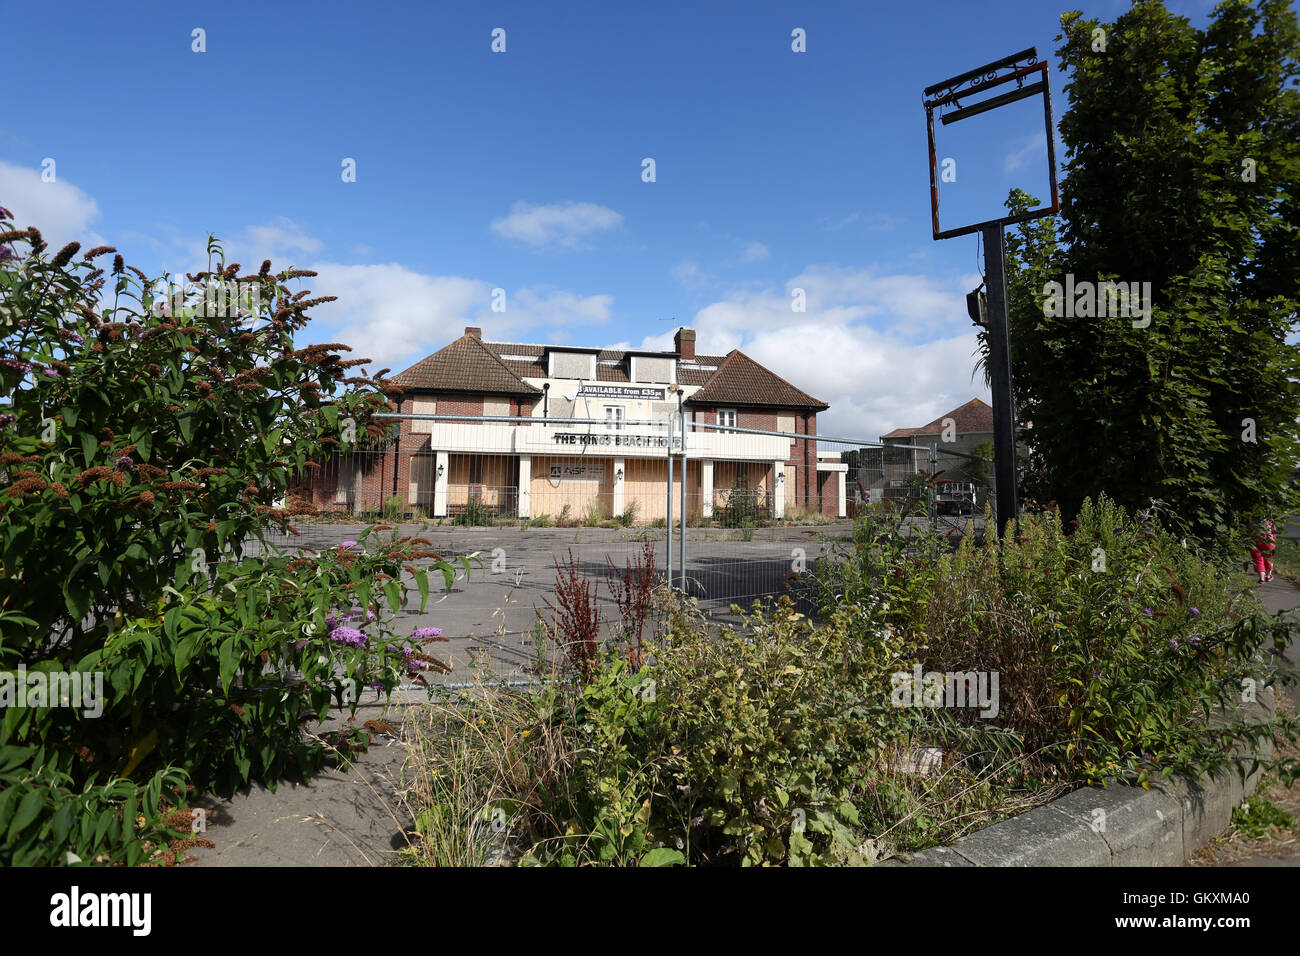 The King's Beach Hotel and pub pictured closed and in disrepair. Pagham, West Sussex, UK. Stock Photo